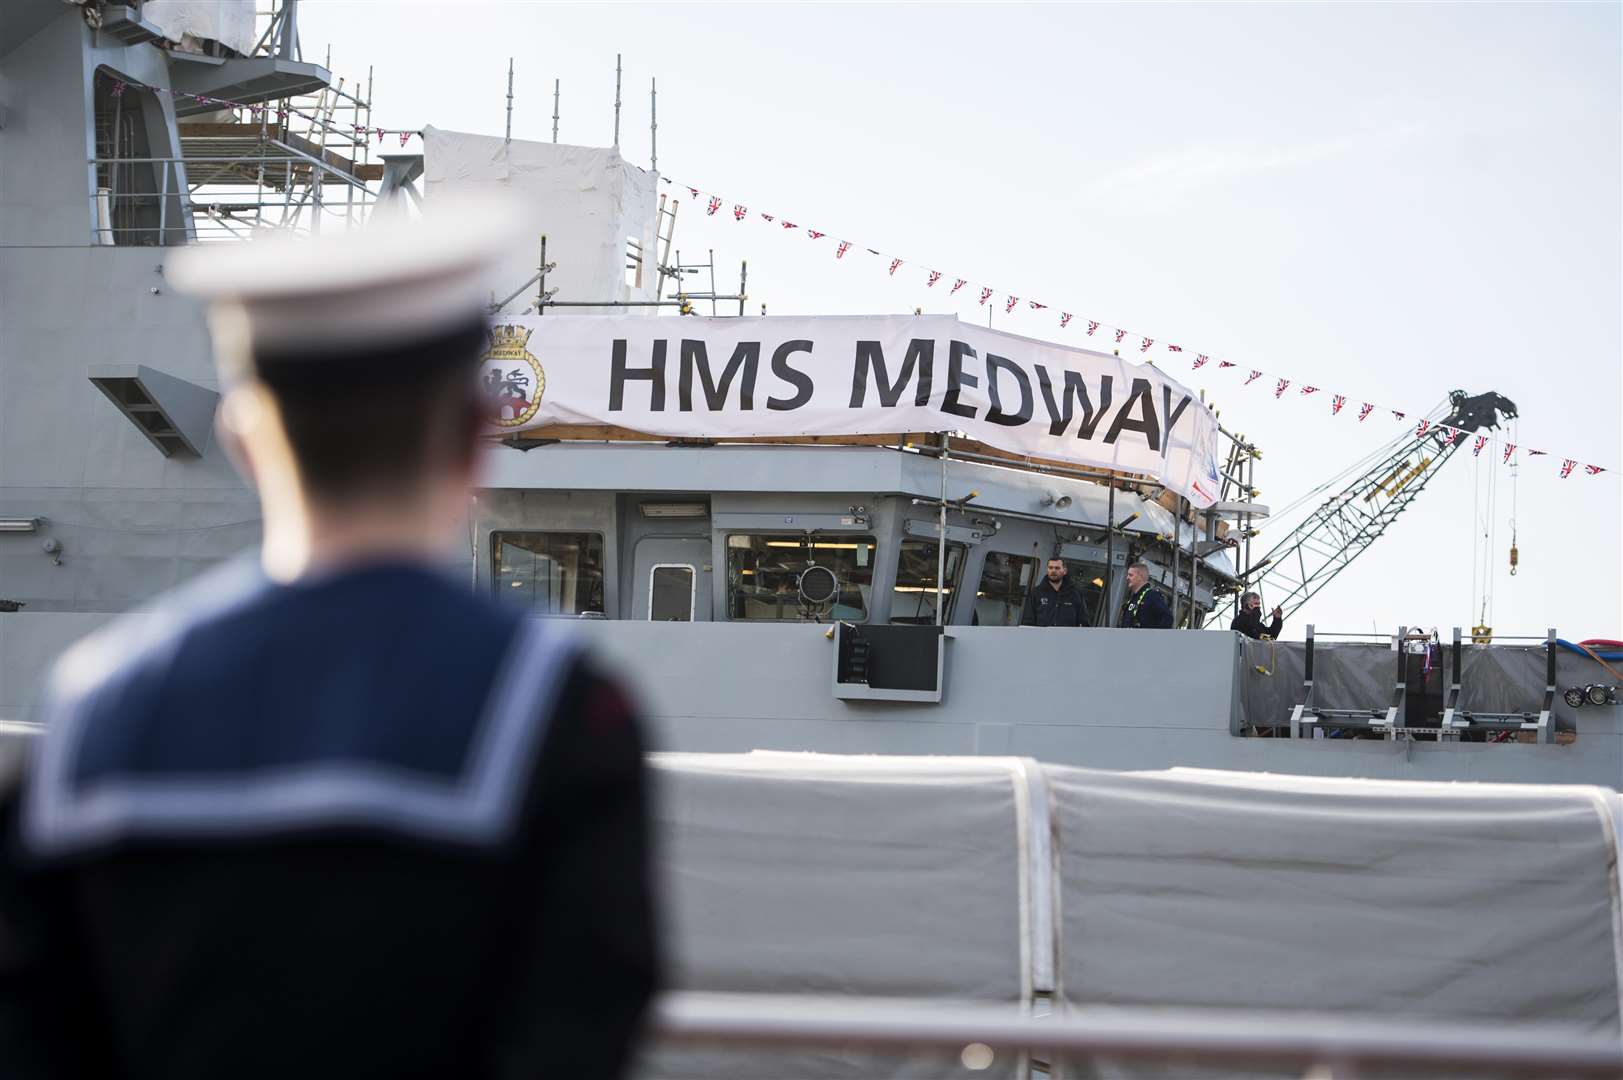 HMS Medway will visit the region from where it takes its name next year